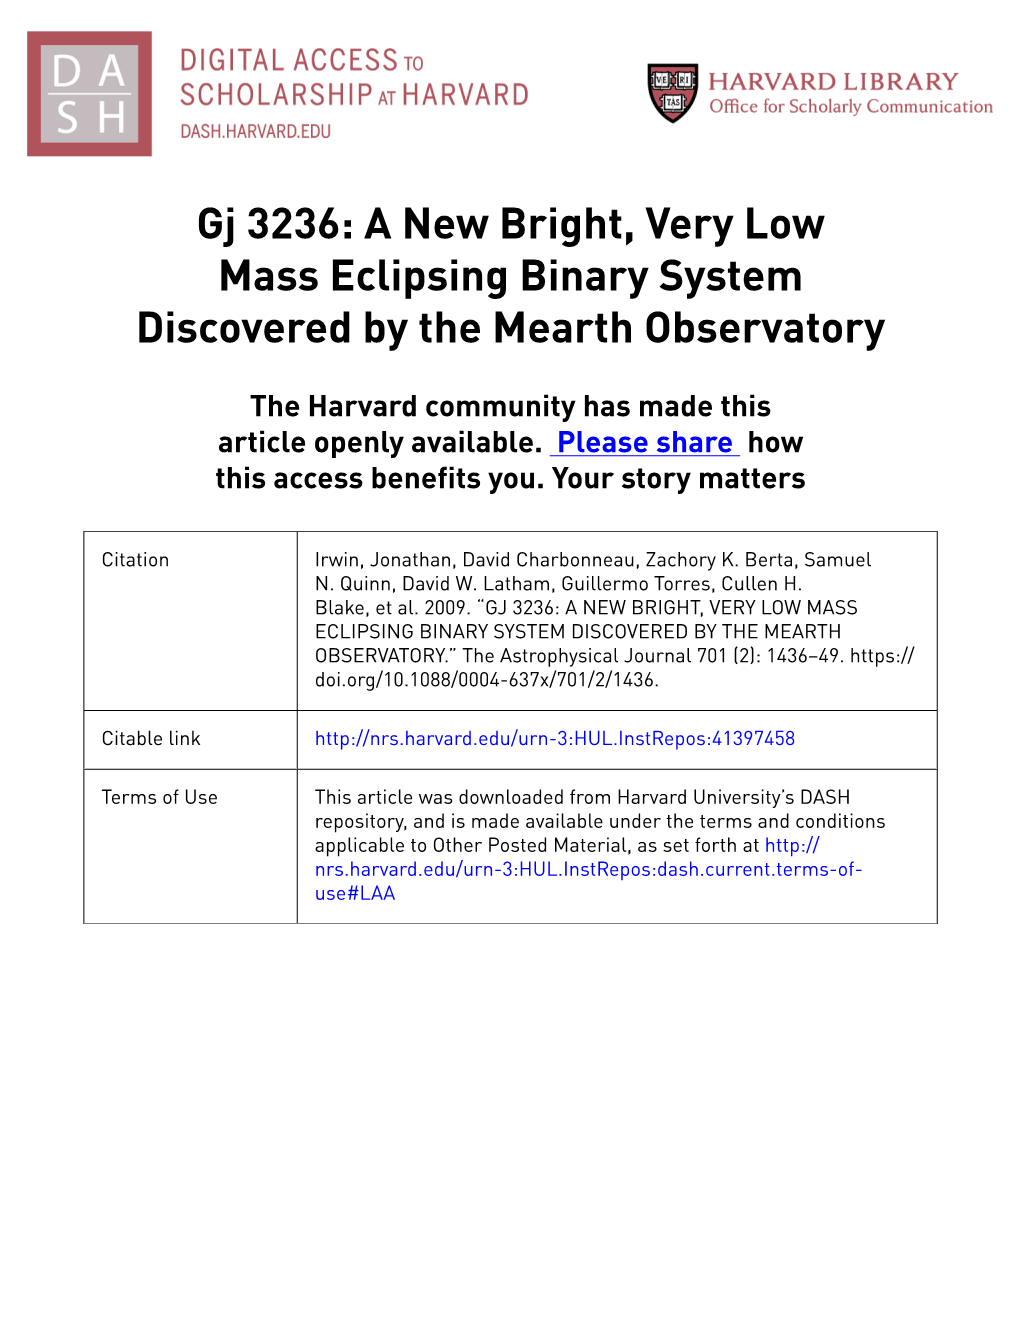 Gj 3236: a New Bright, Very Low Mass Eclipsing Binary System Discovered by the Mearth Observatory